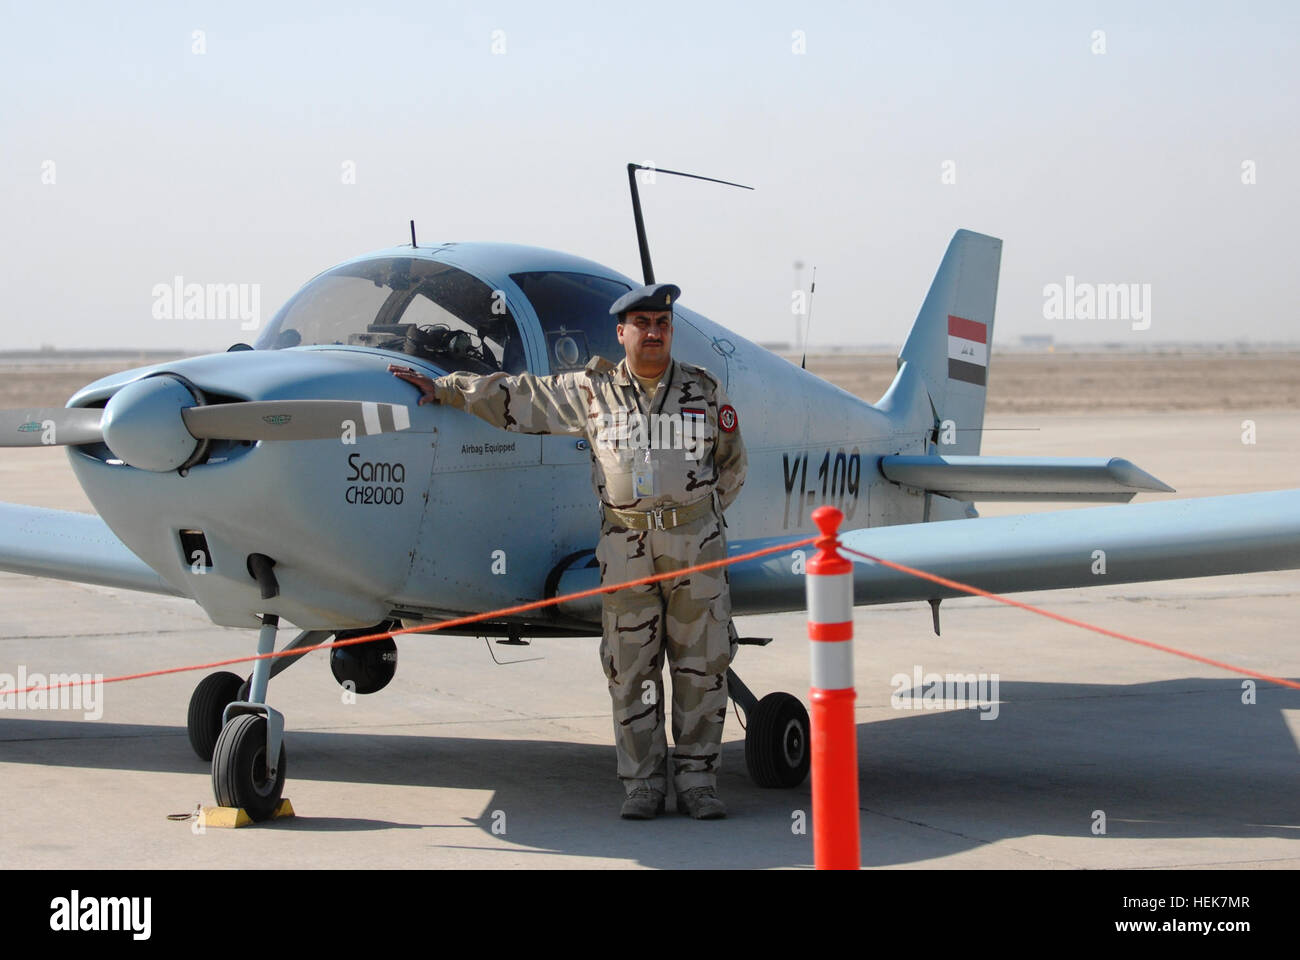 An Iraqi air force pilot shows off a CH2000 reconnaissance plane based at Tallil Air Base.  The 70th Iraqi Squadron was activated on the base Nov. 23 and will continue training and conducting operations to support Operation New Dawn. An Iraqi air force pilot with a CH2000 reconnaissance plane Stock Photo